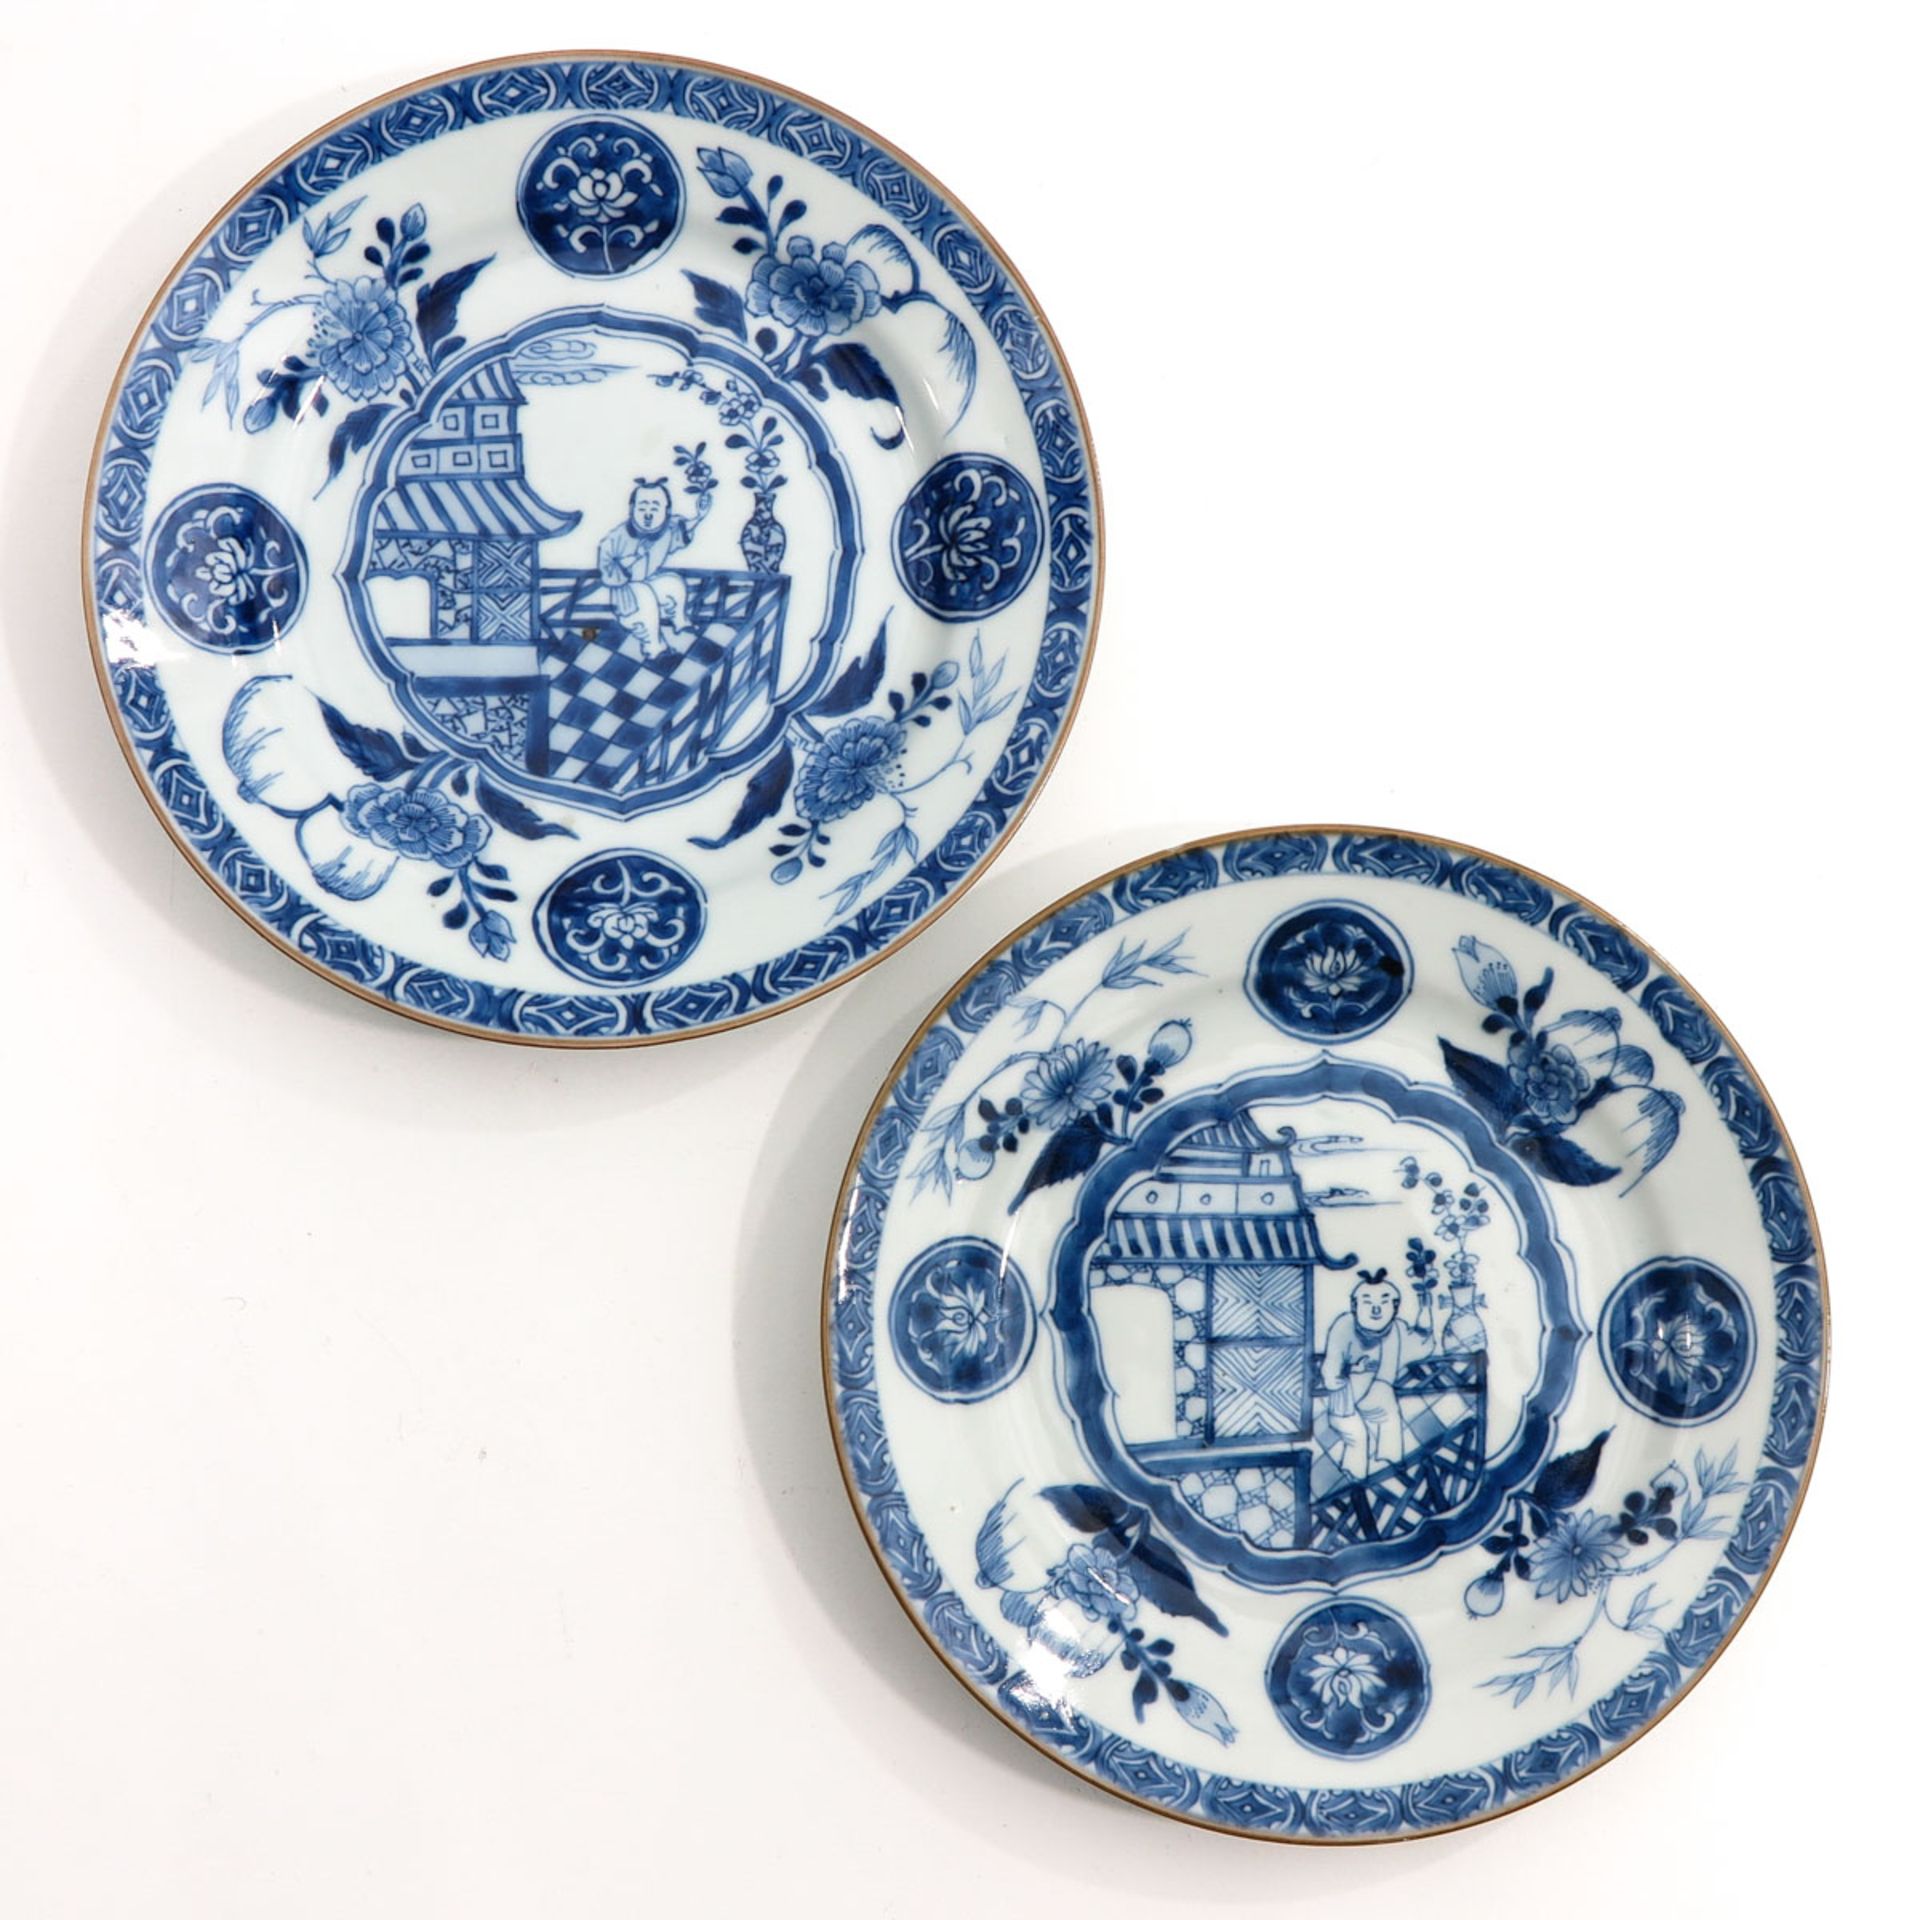 A Series of 4 Blue and white Plates - Image 5 of 9